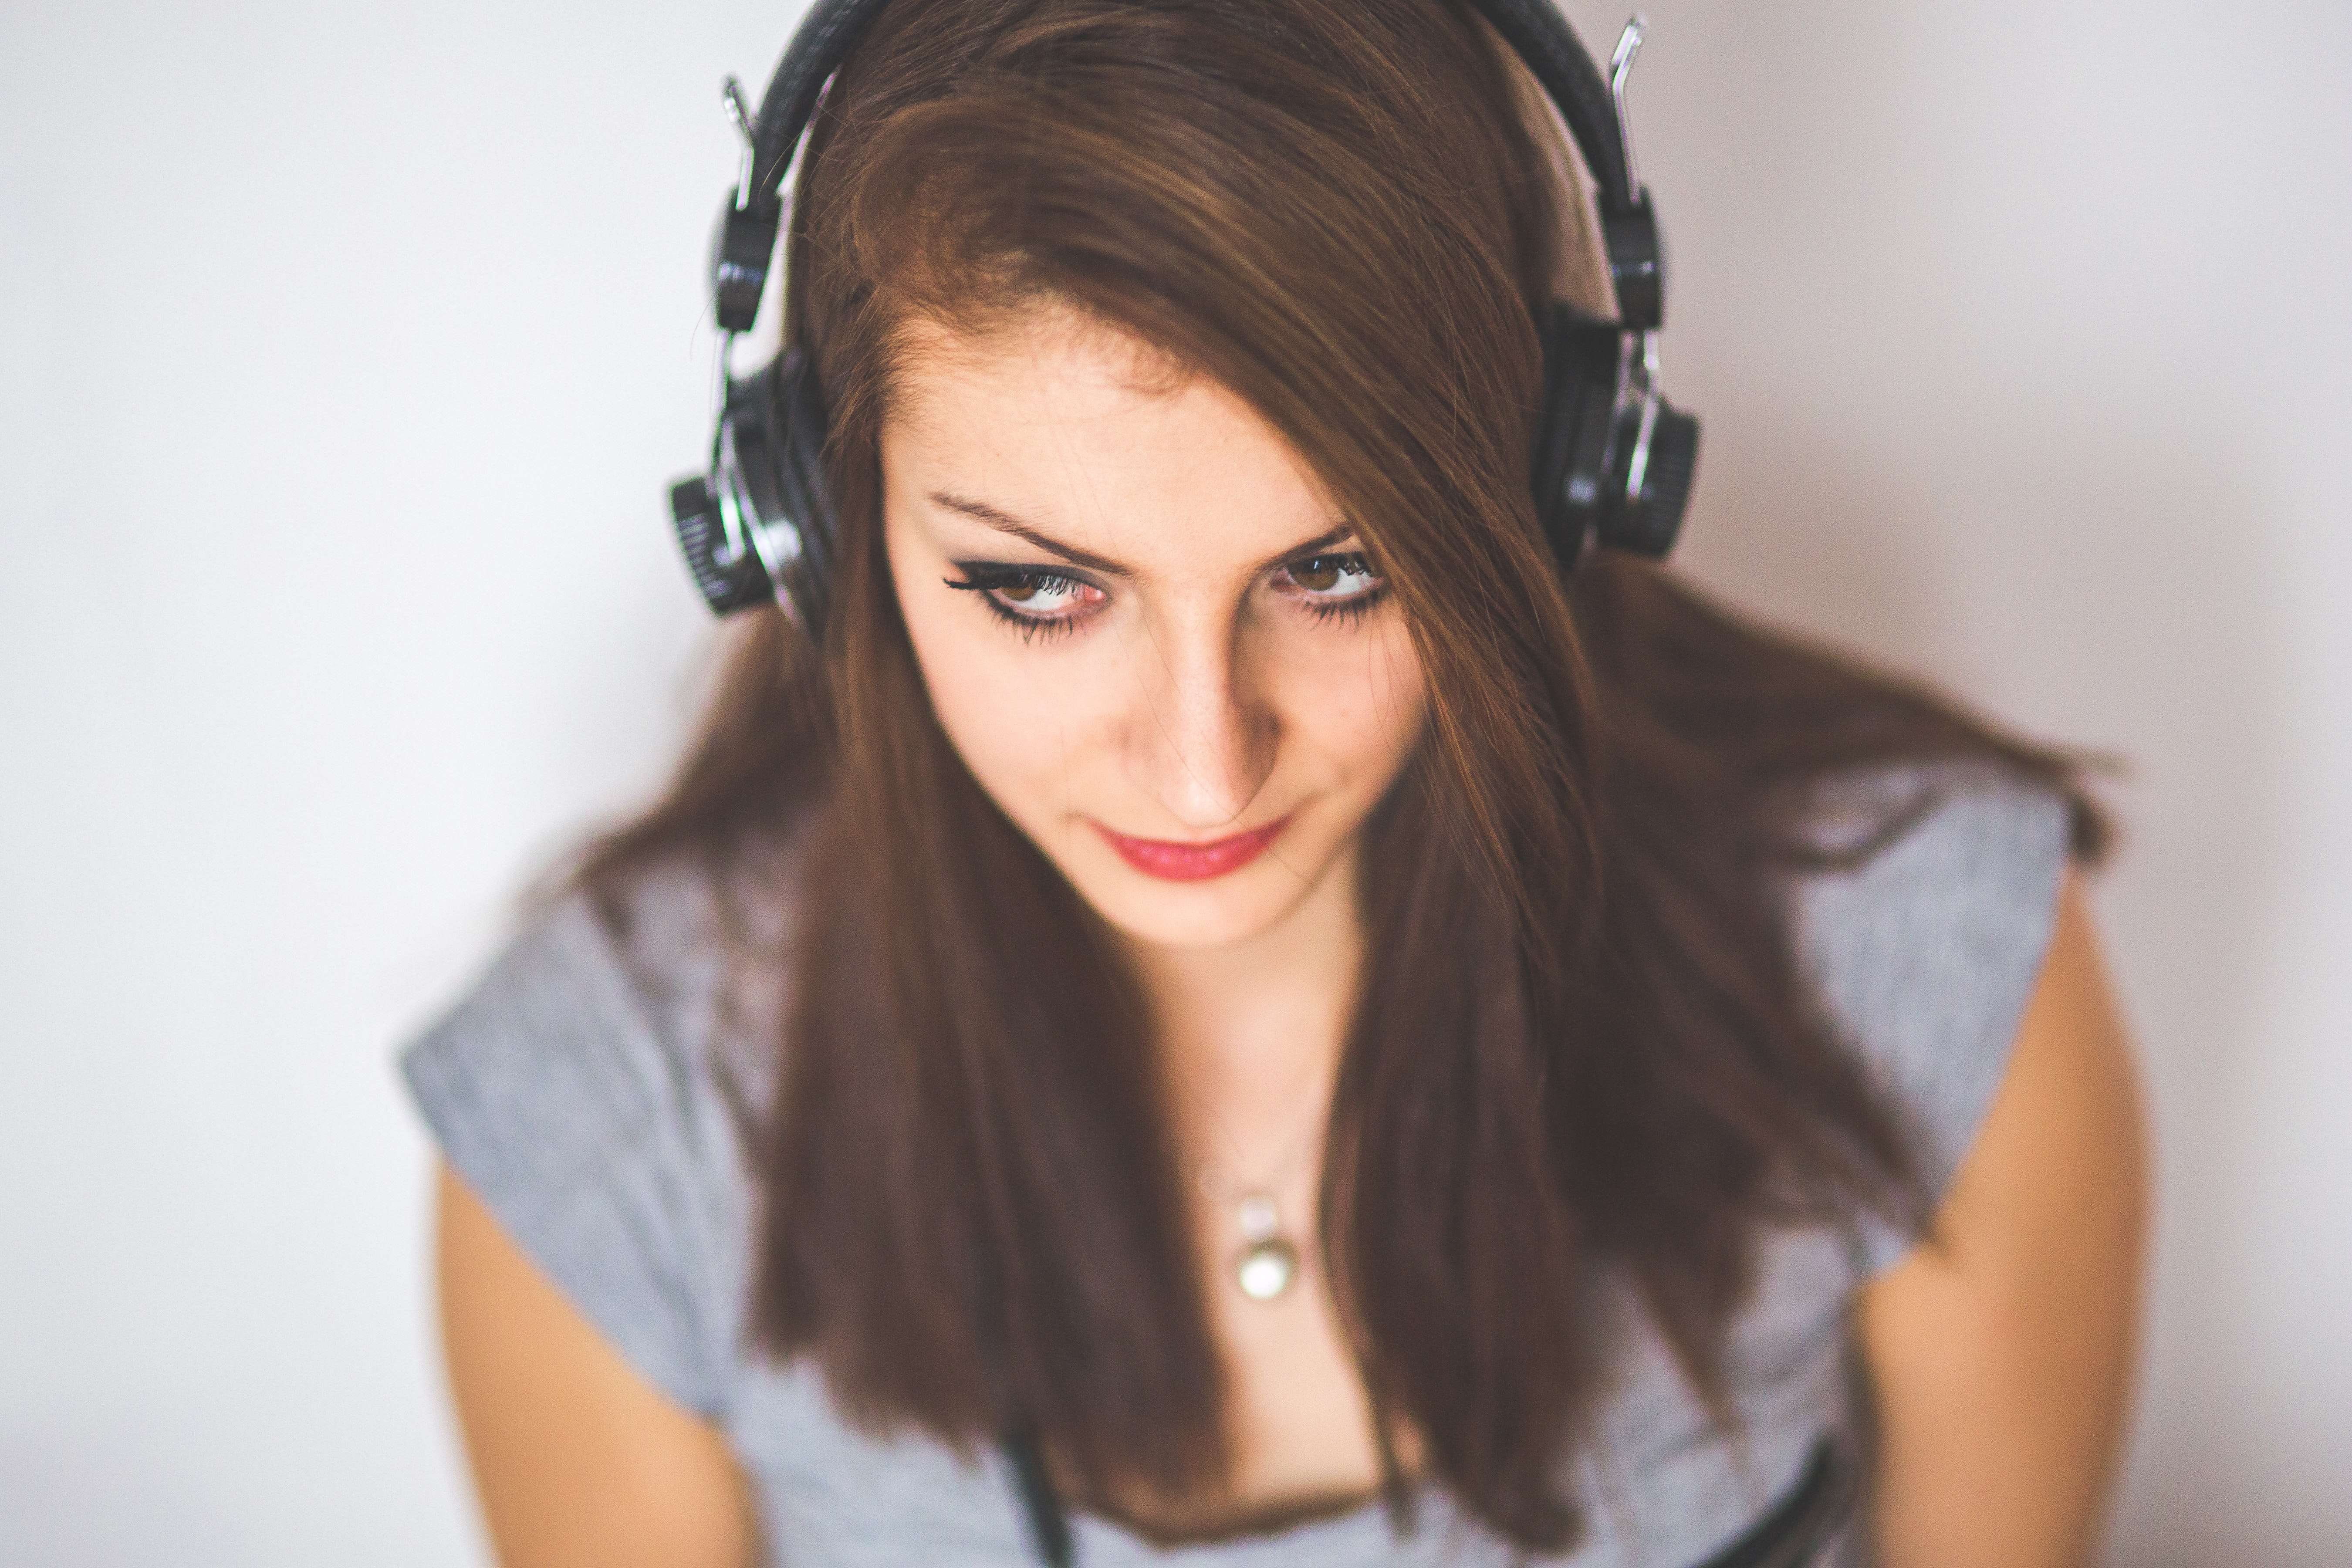 Portrait of young attractive girl listening to music with headphones photo